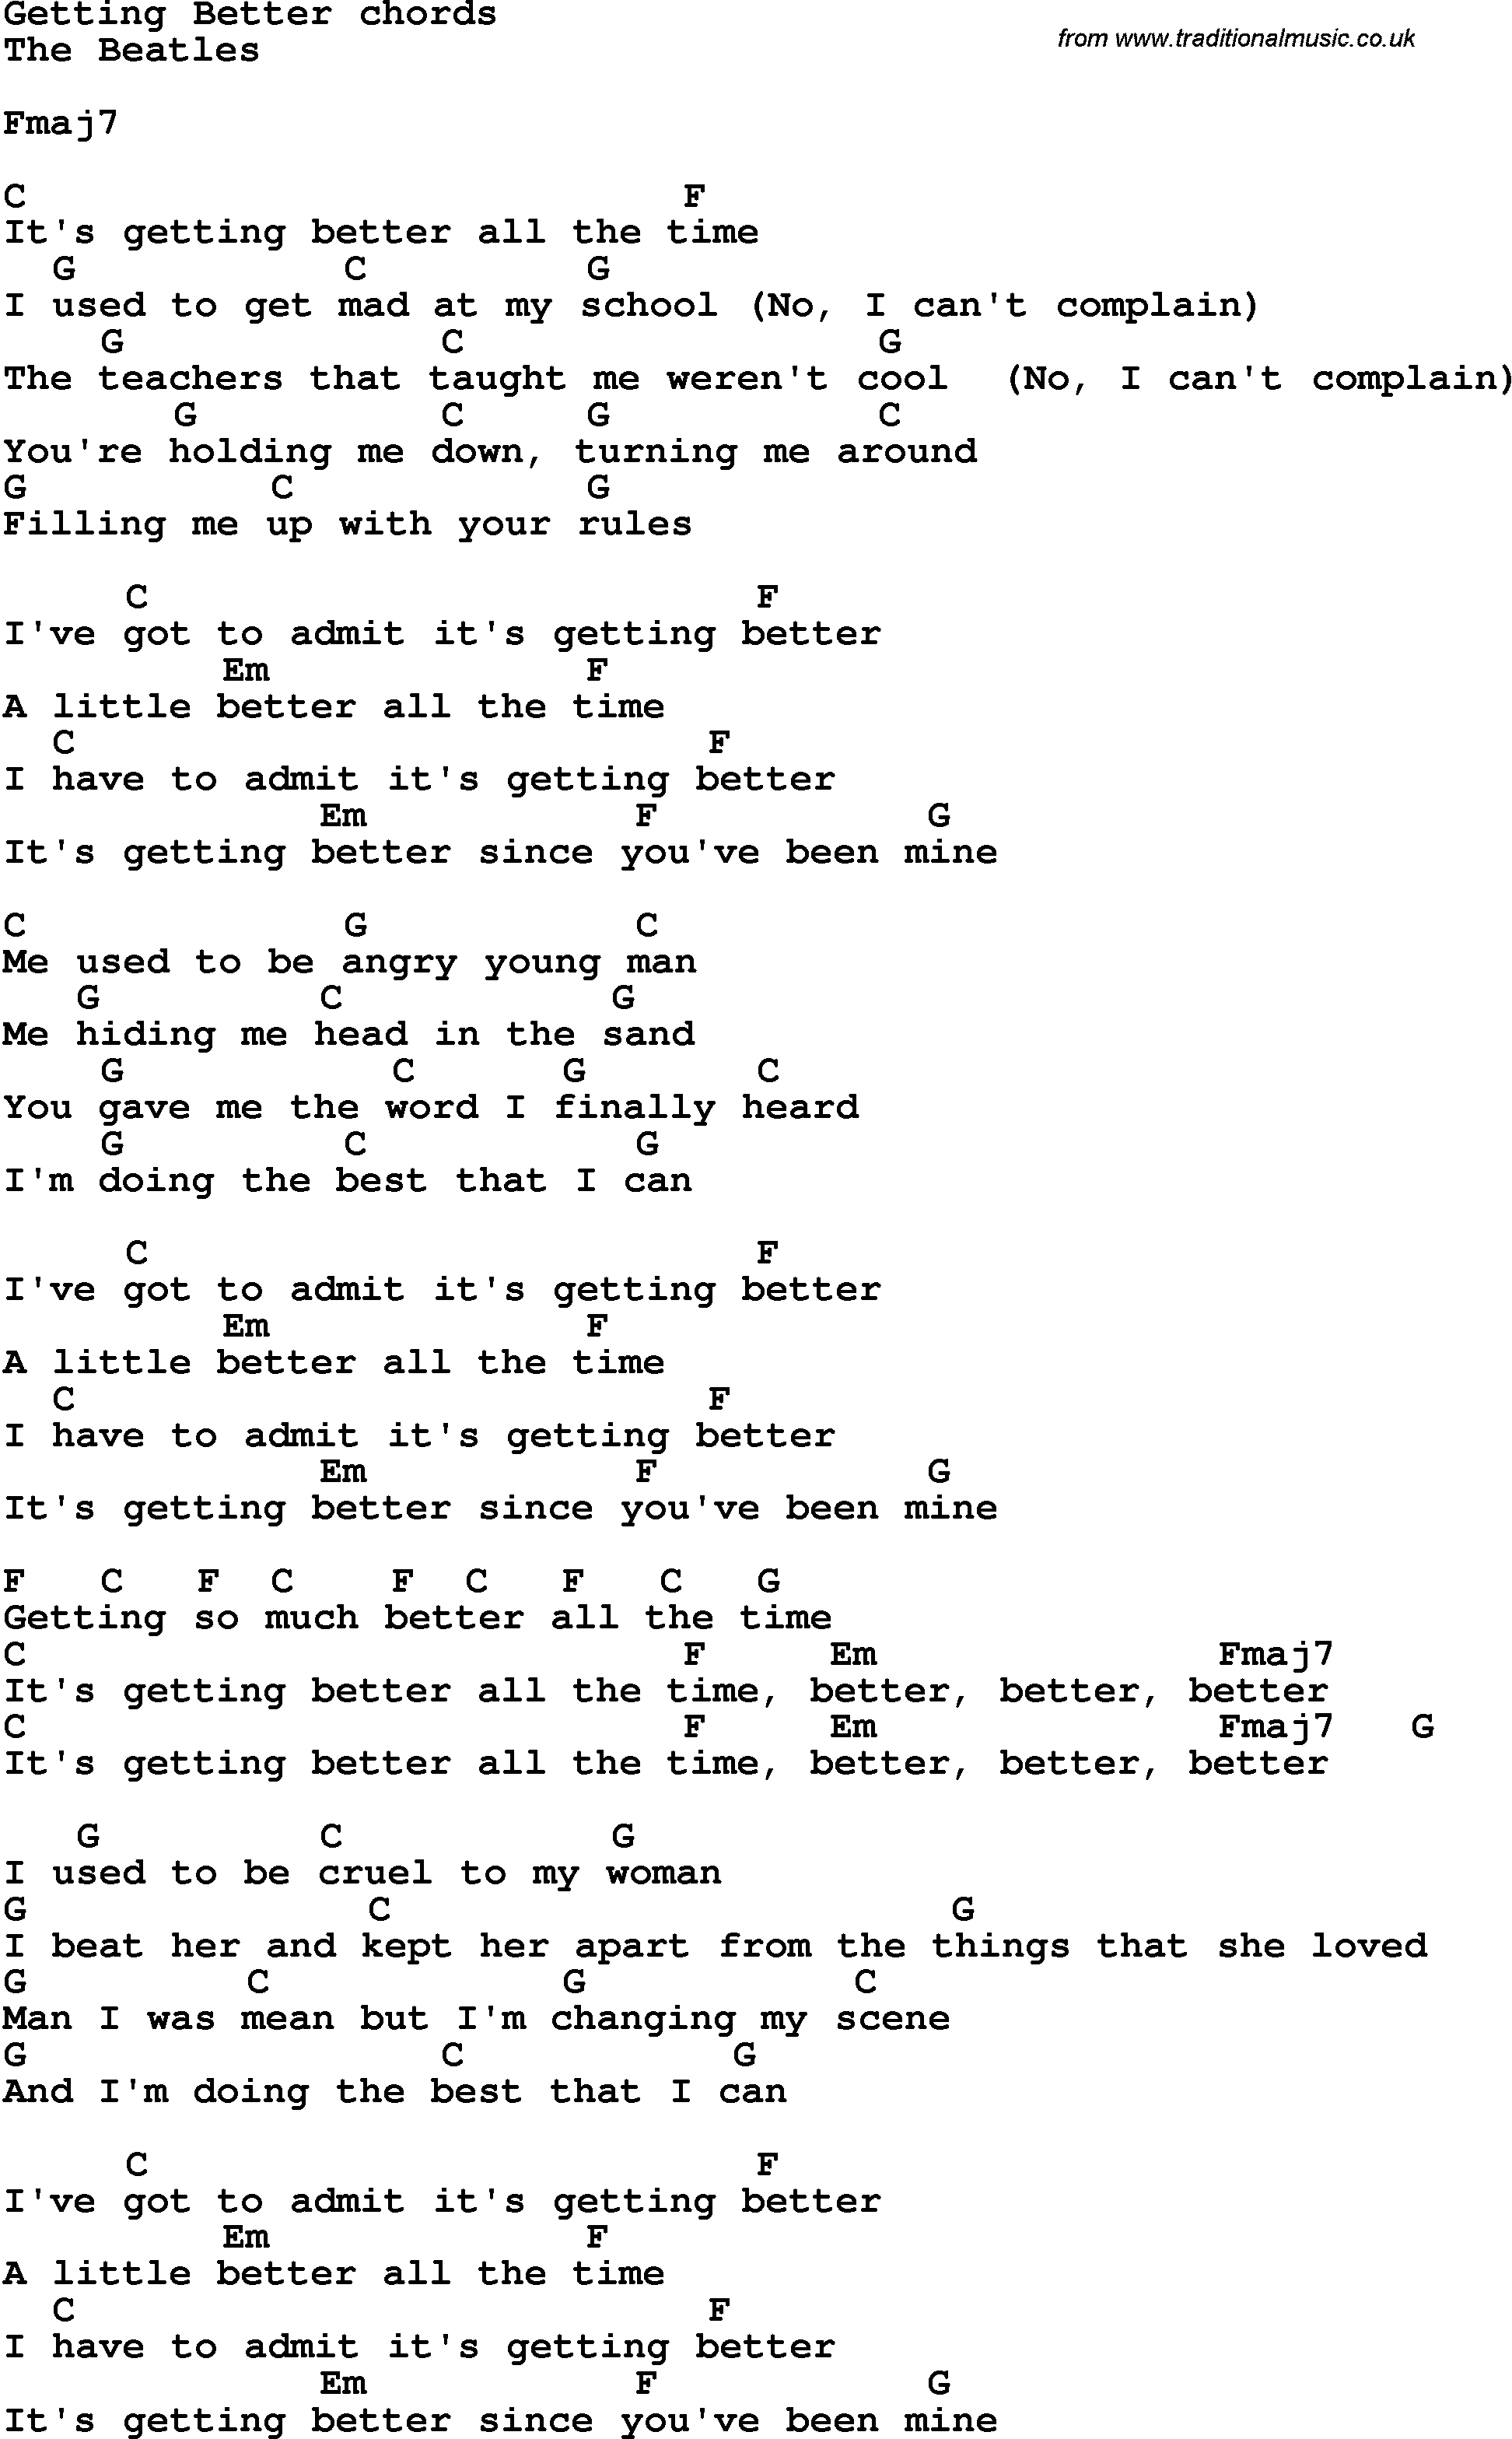 Song Lyrics with guitar chords for Getting Better - The Beatles